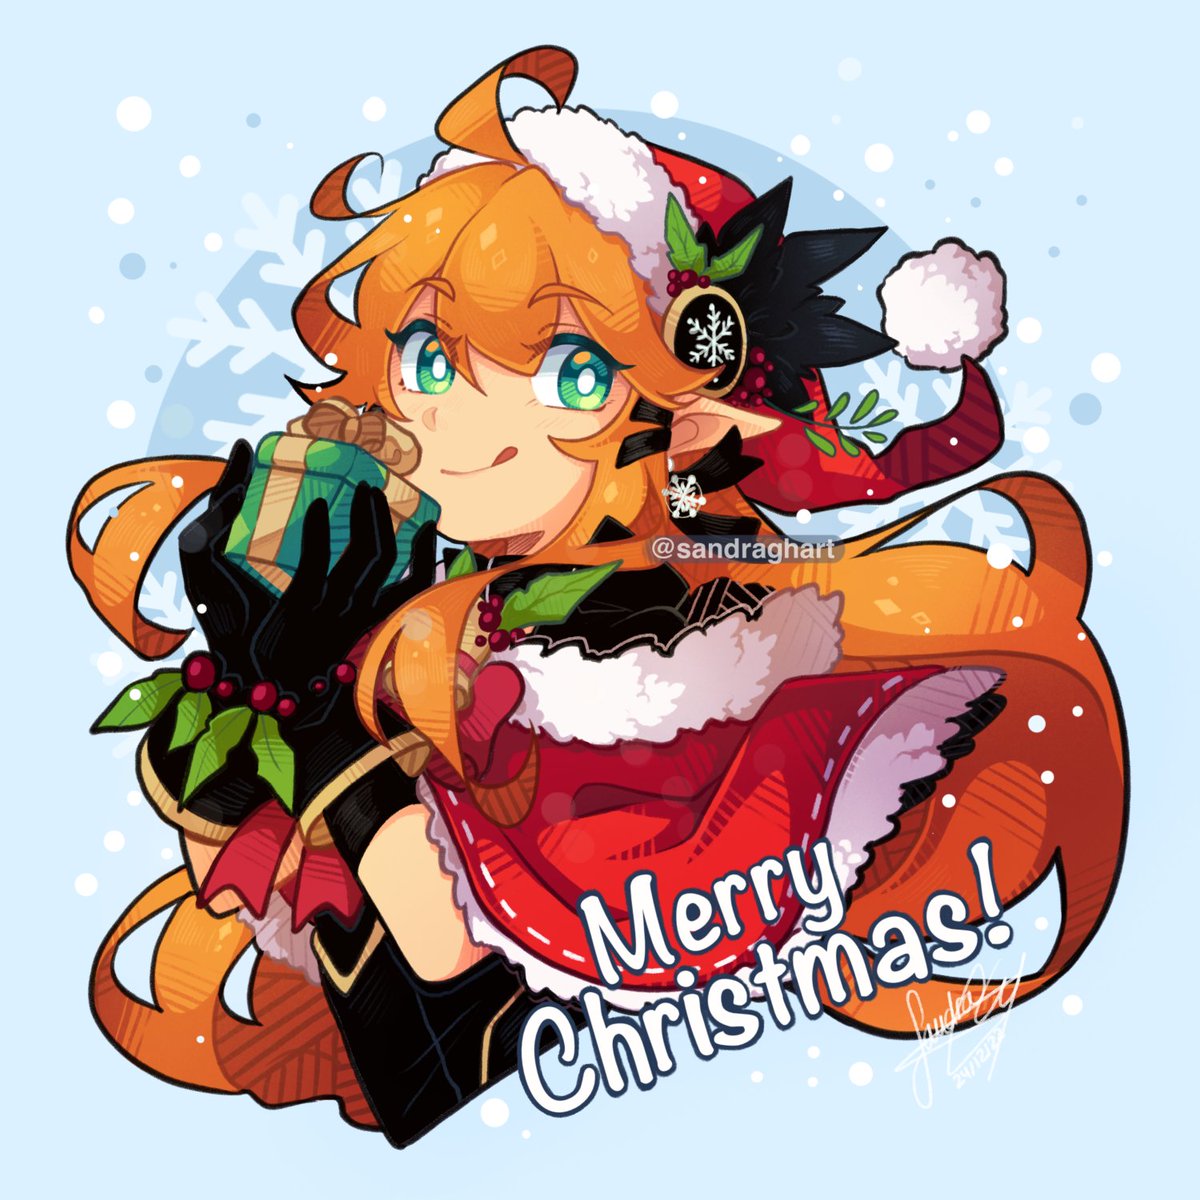 「 MERRY CHRISTMAS! Hope you have a happy 」|🌠 ​ Sandra 🌠 FicZone 2023のイラスト